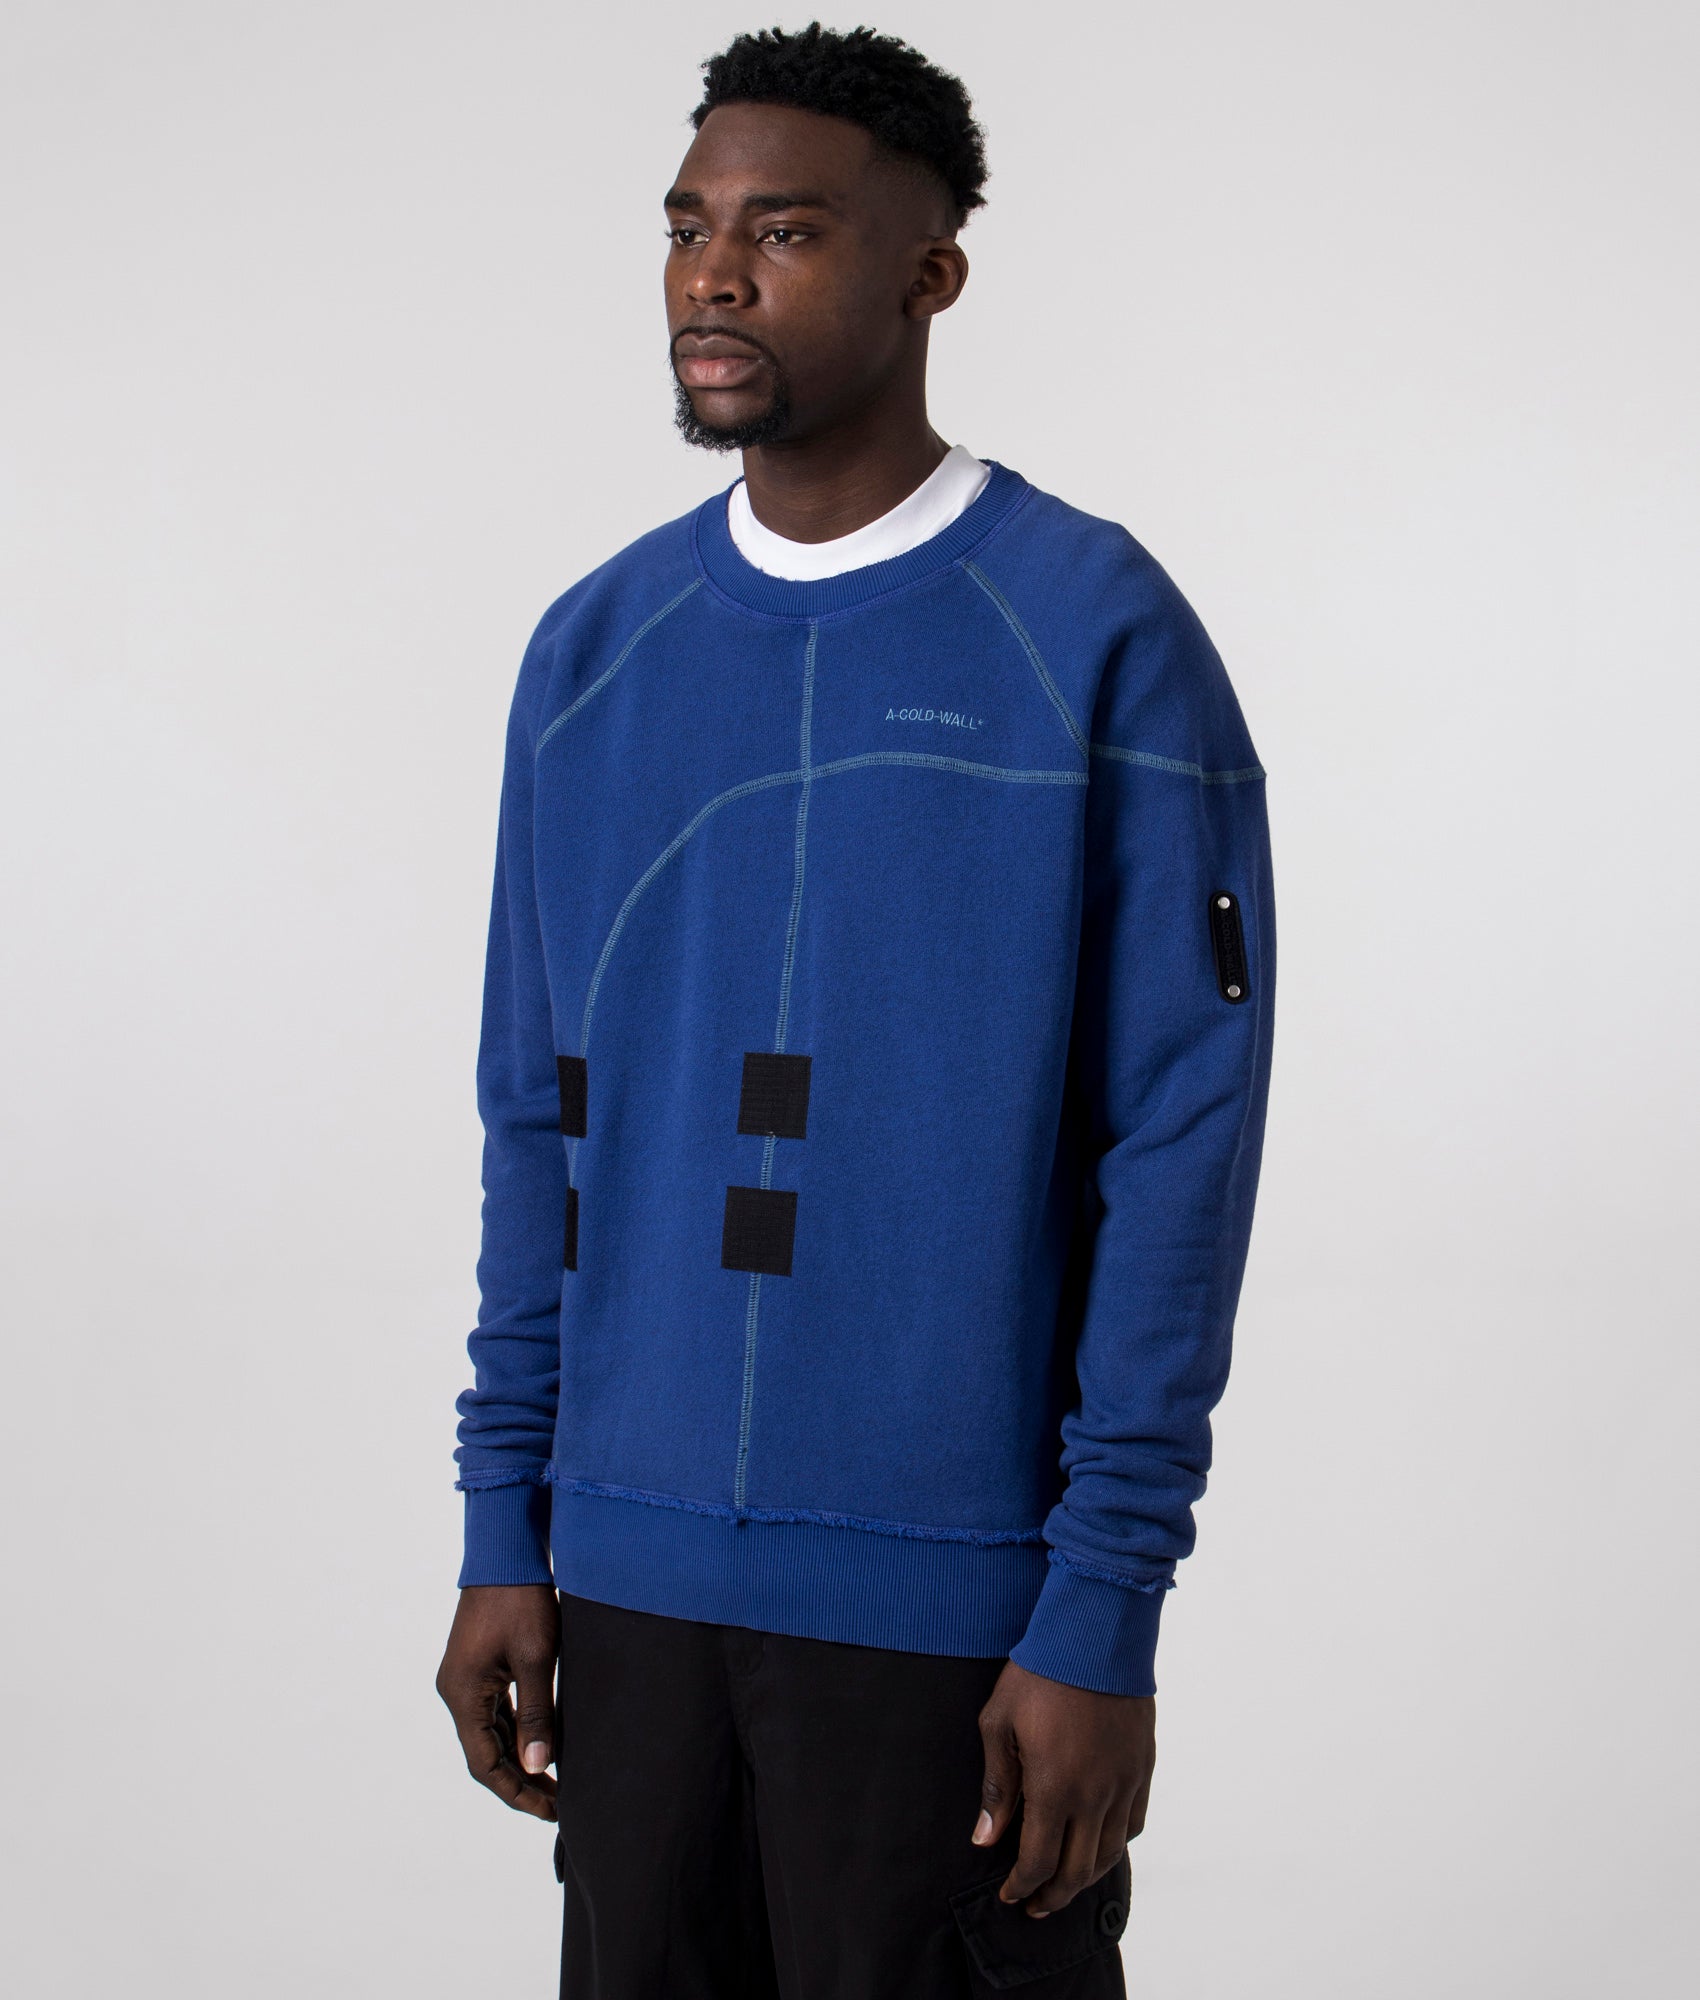 A-COLD-WALL* Mens Relaxed Fit Intersect Sweatshirt - Colour: Volt Blue - Size: Large